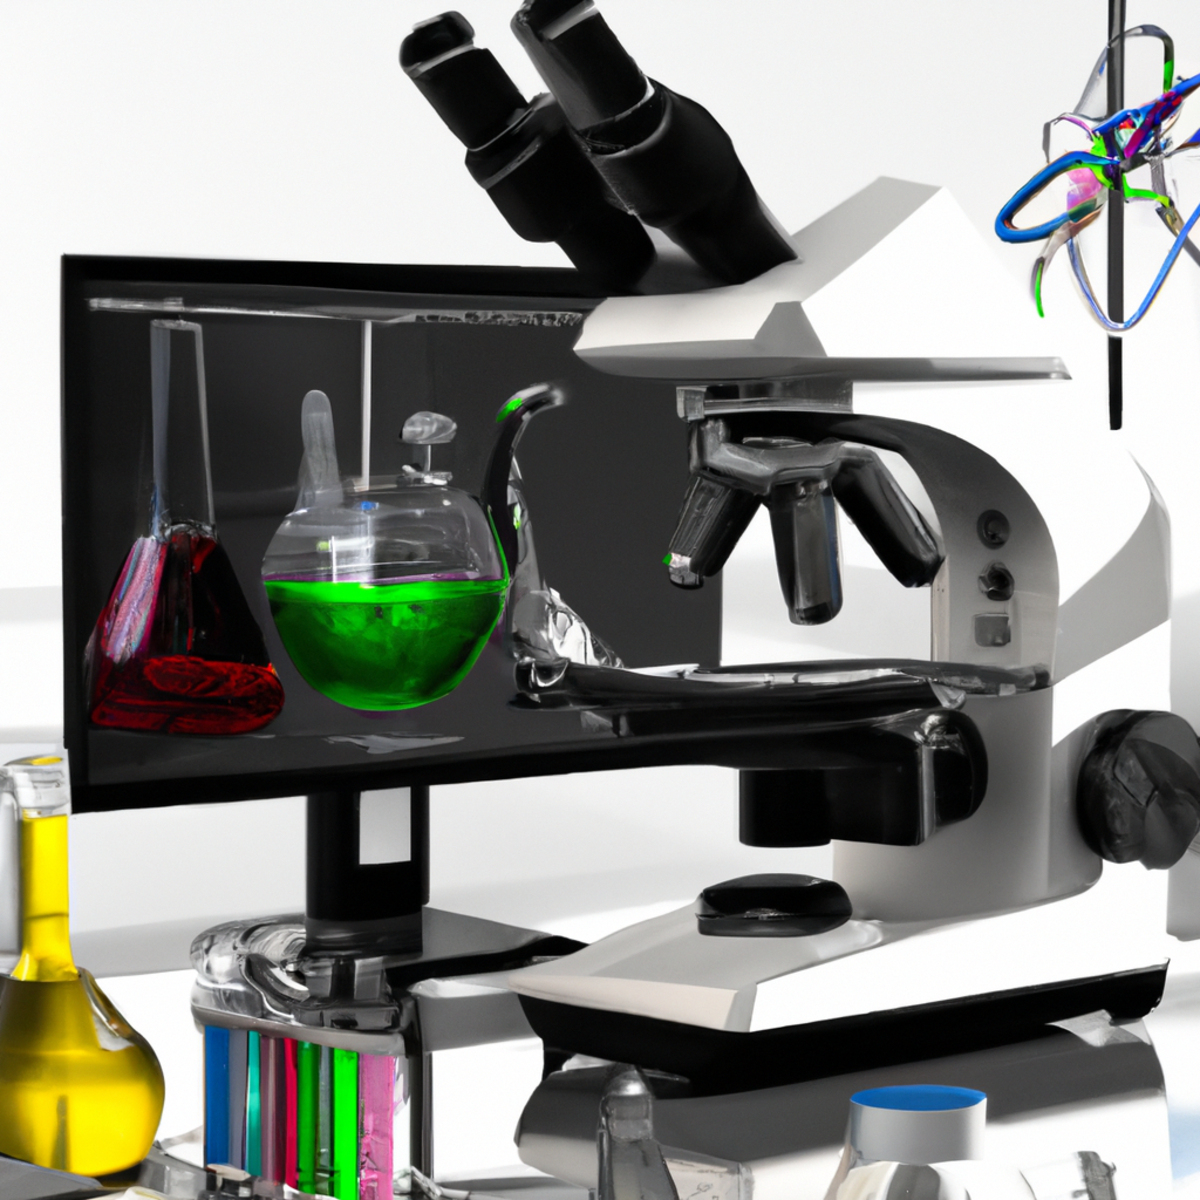 Cutting-edge lab with advanced microscope, vibrant beaker, and complex data on monitor, symbolizing innovative research and progress in cystinuria treatment.